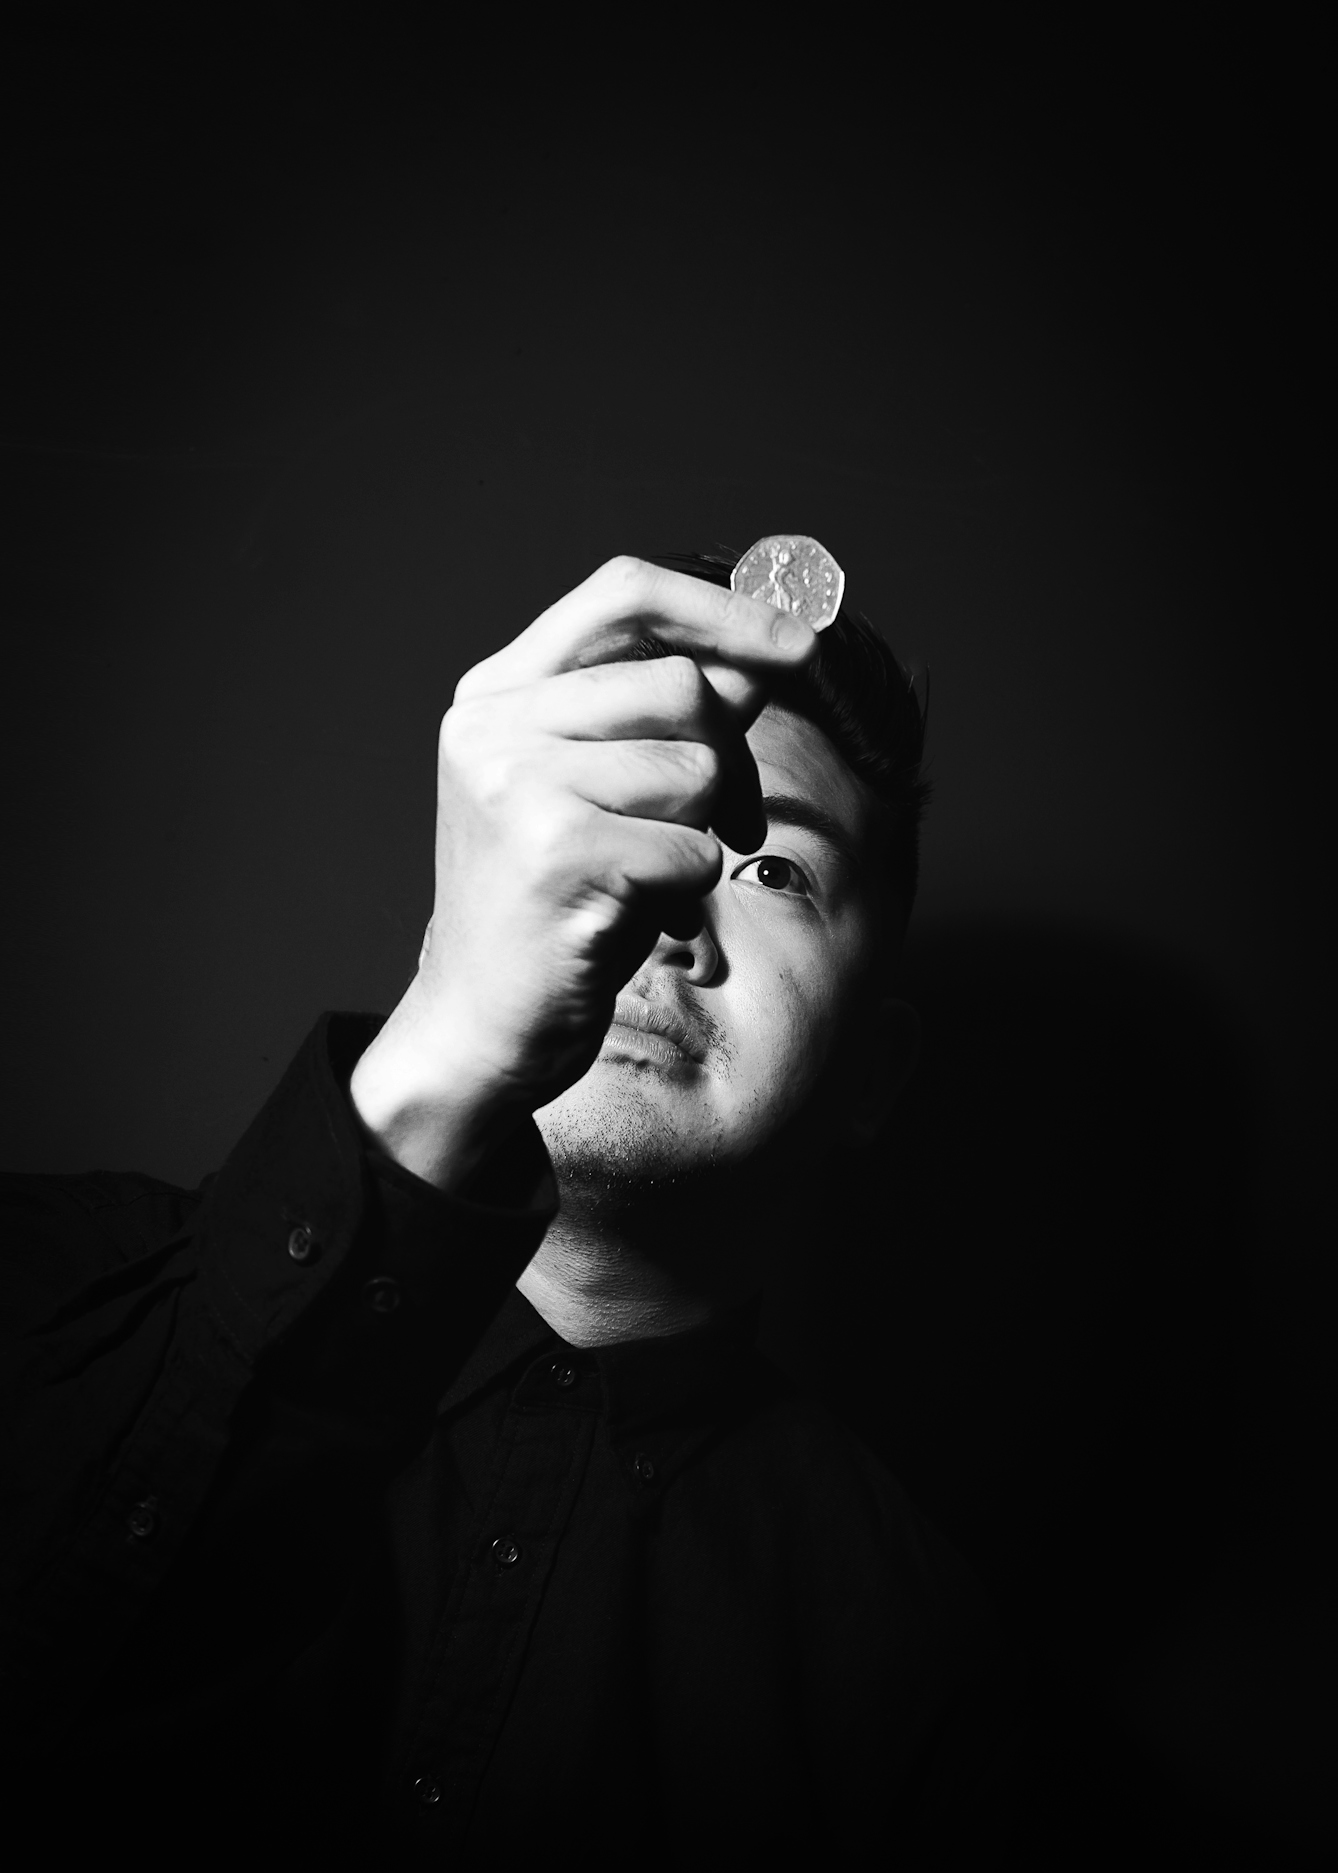 Black and white photographic portrait of a man dressed in a black shirt holding up a 50 pence piece to his face, held in his right hand. He is pictured from the chest up, his eyes directed towards the coin. The man's face and hand is spotlit in a small circle of light. He is standing against a black background which means he is surrounded by darkness.